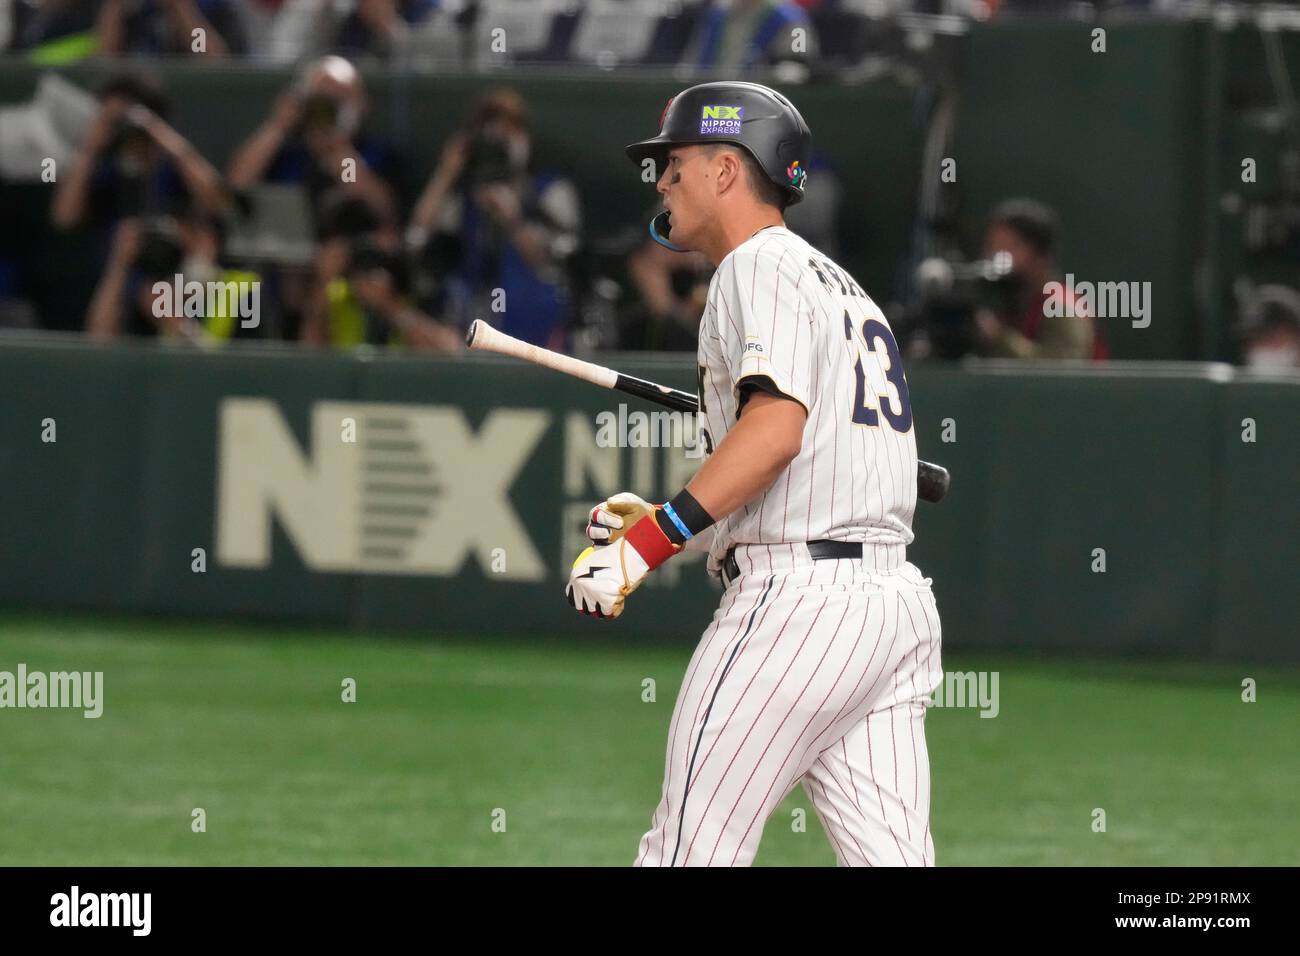 Japan's Lars Nootbaar reacts after hitting a single during the